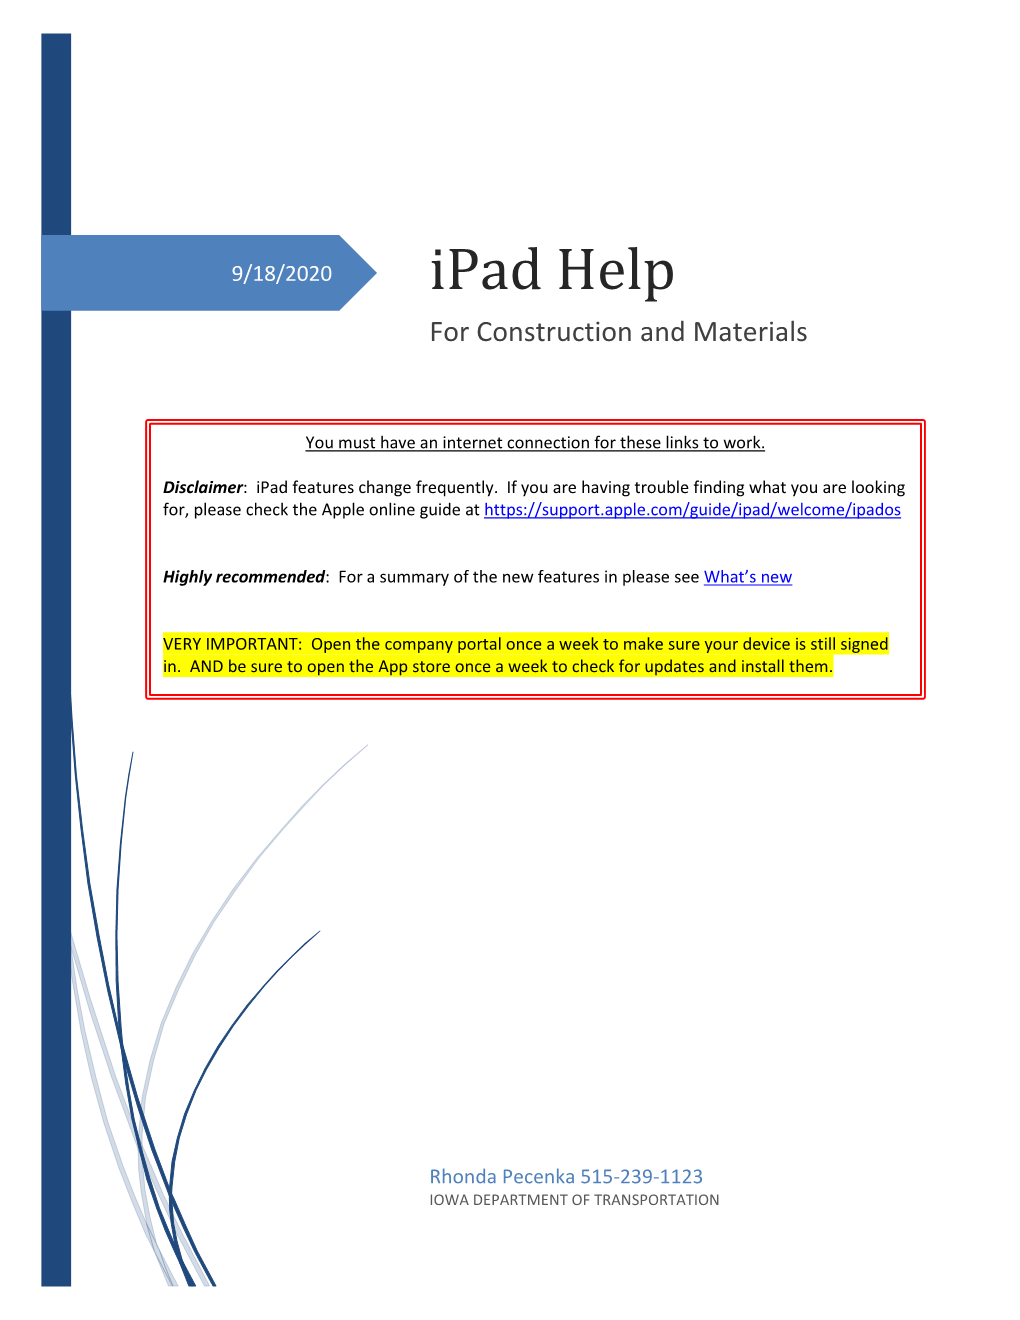 Ipad Help for Construction and Materials